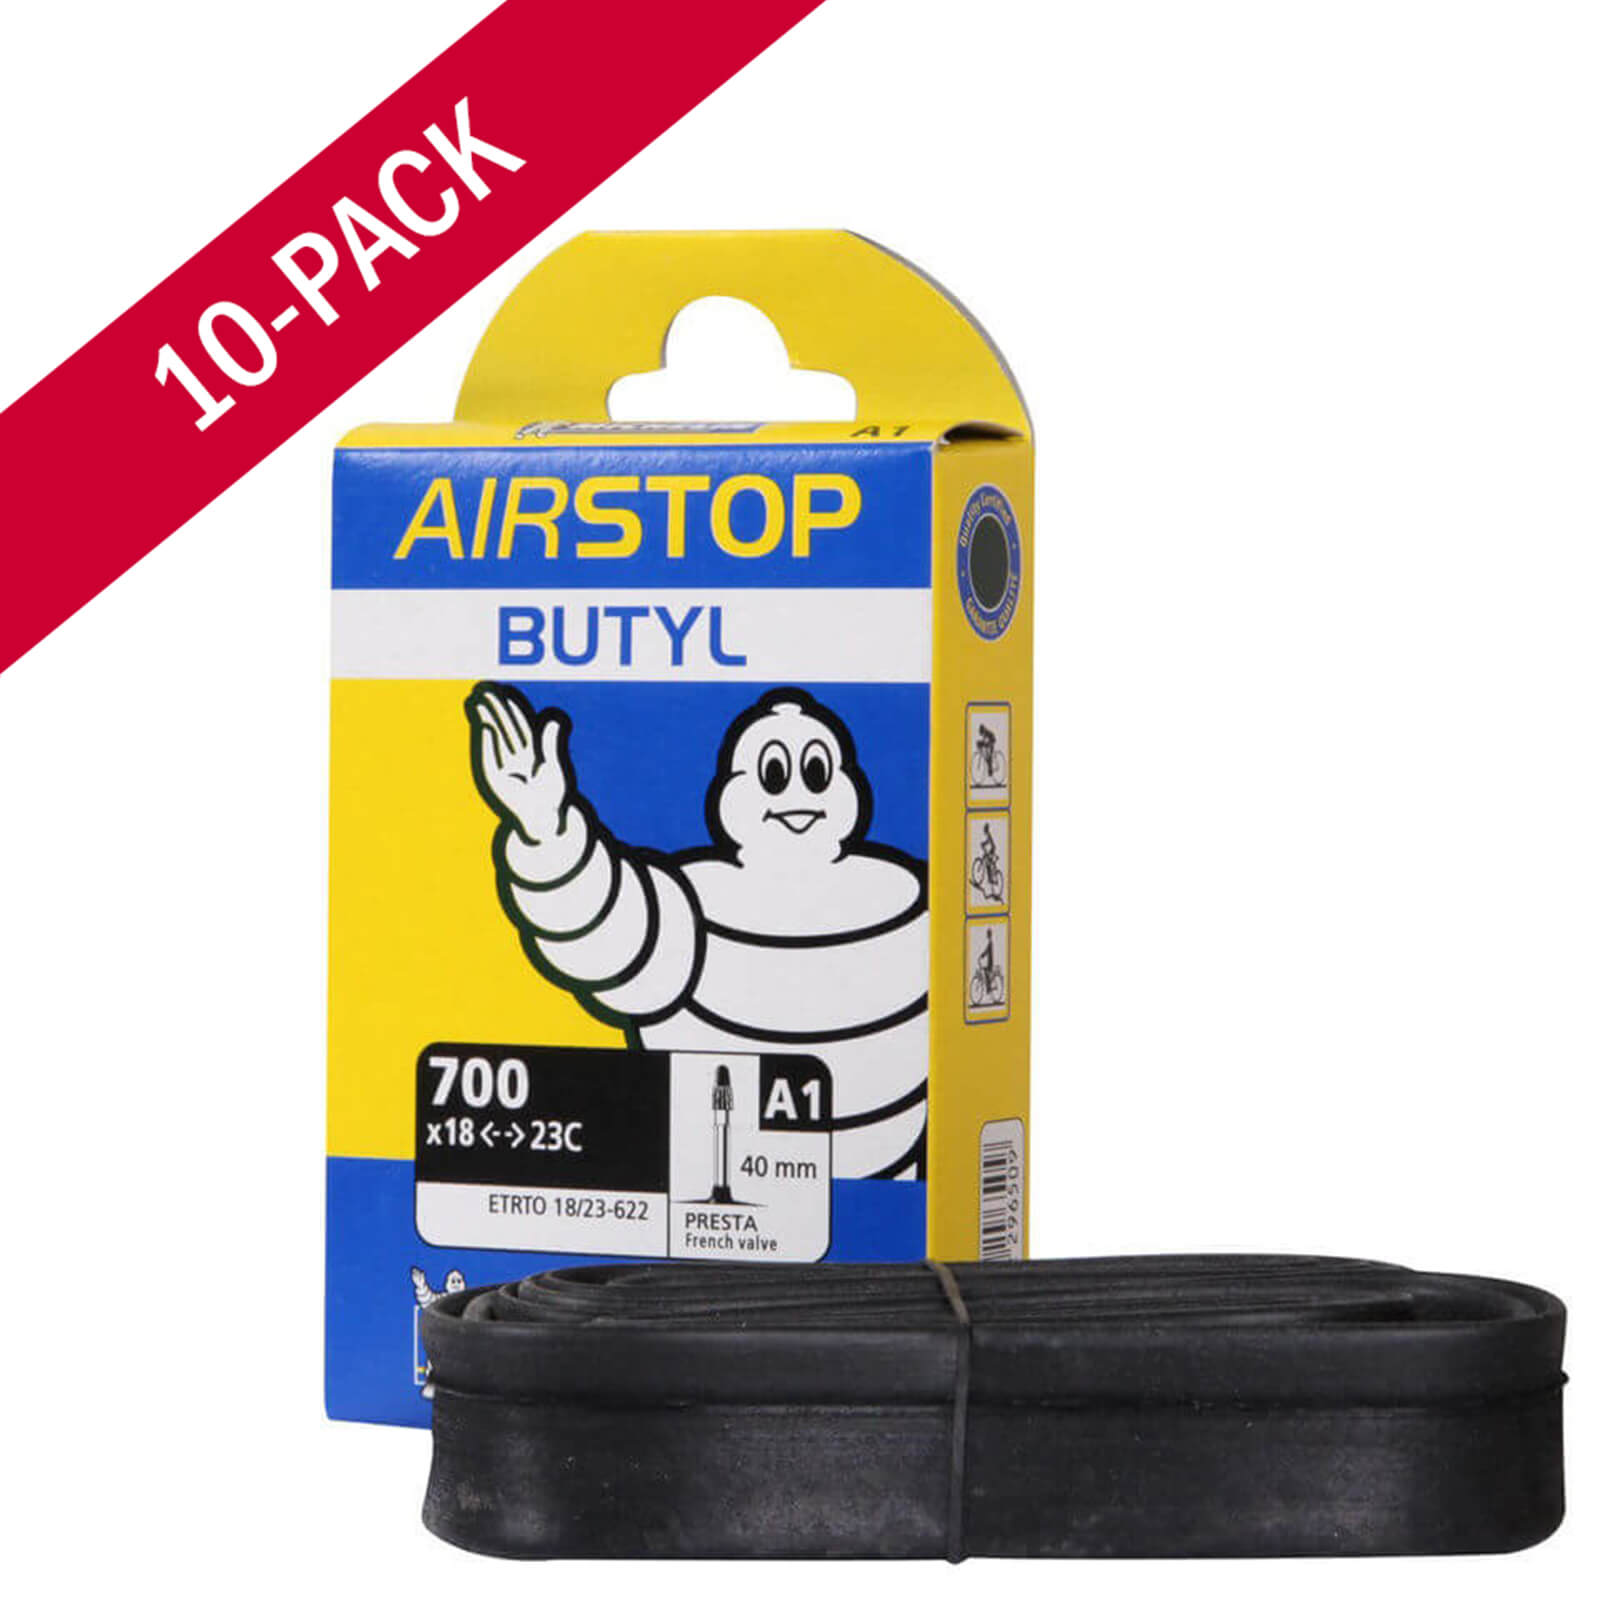 Michelin A1 Airstop Road Inner Tube - Multipack - 700c x 18-25mm - Presta 52mm - 10 Pack